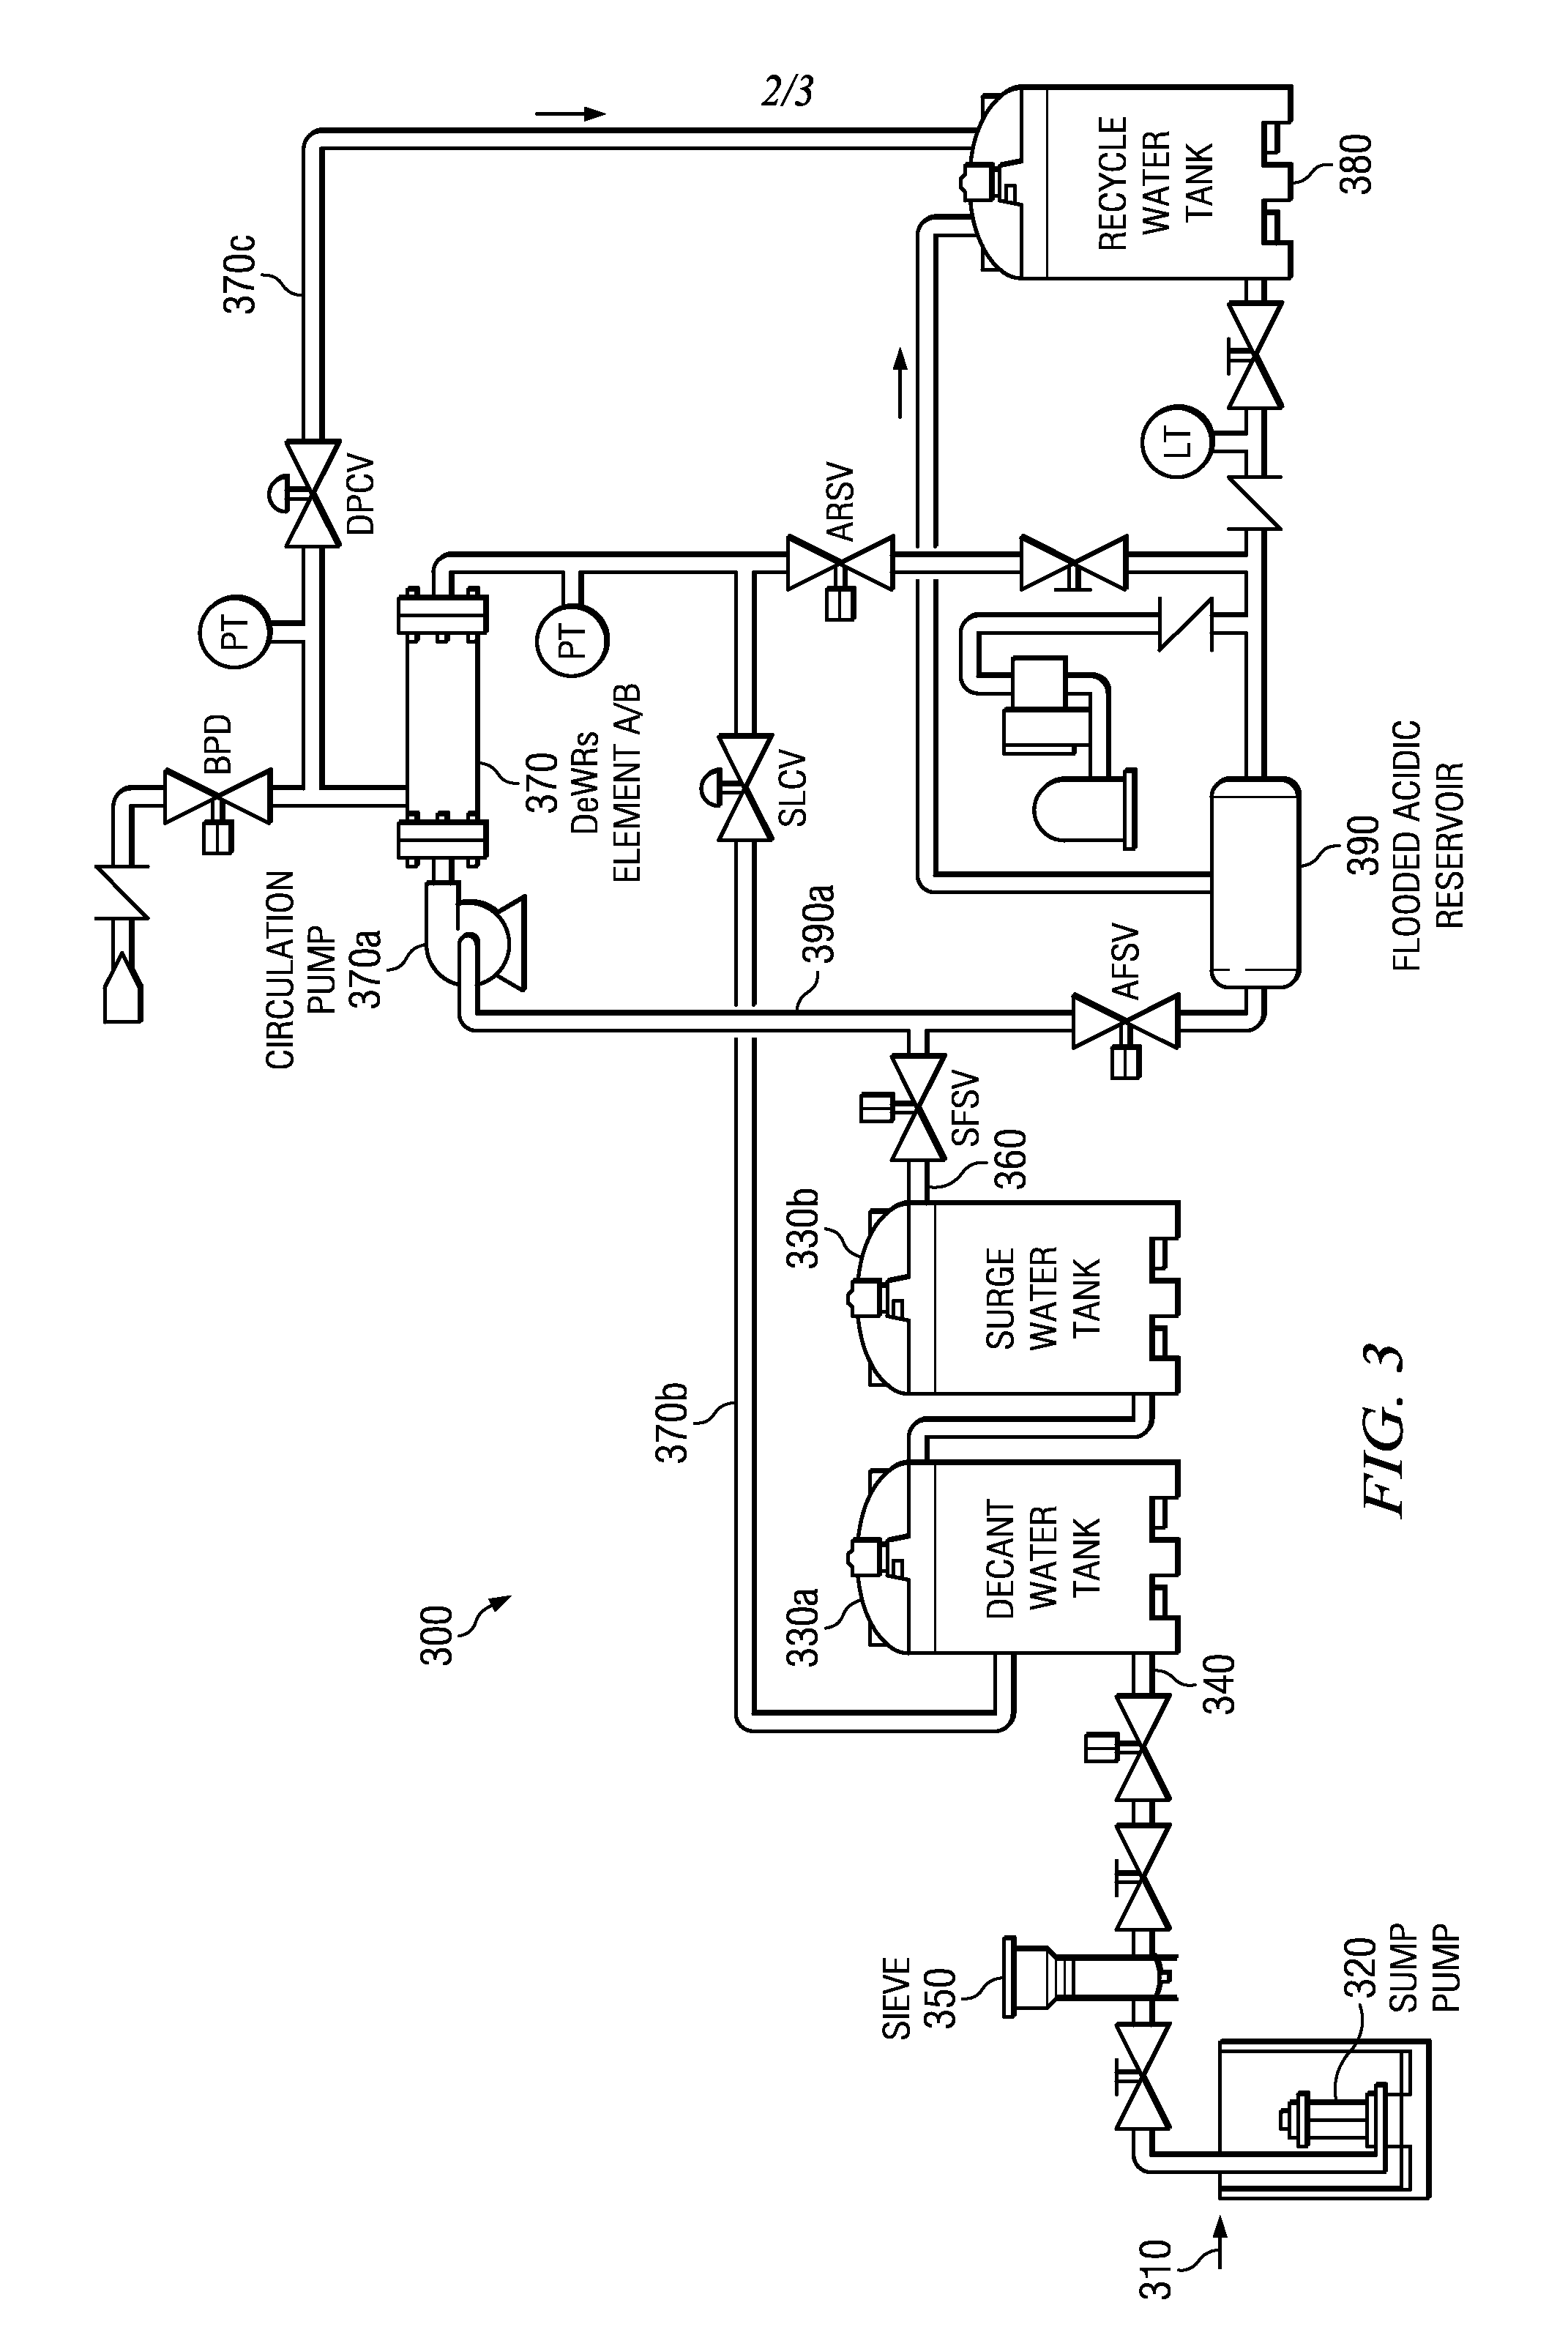 Integrated particulate filtration and dewatering system